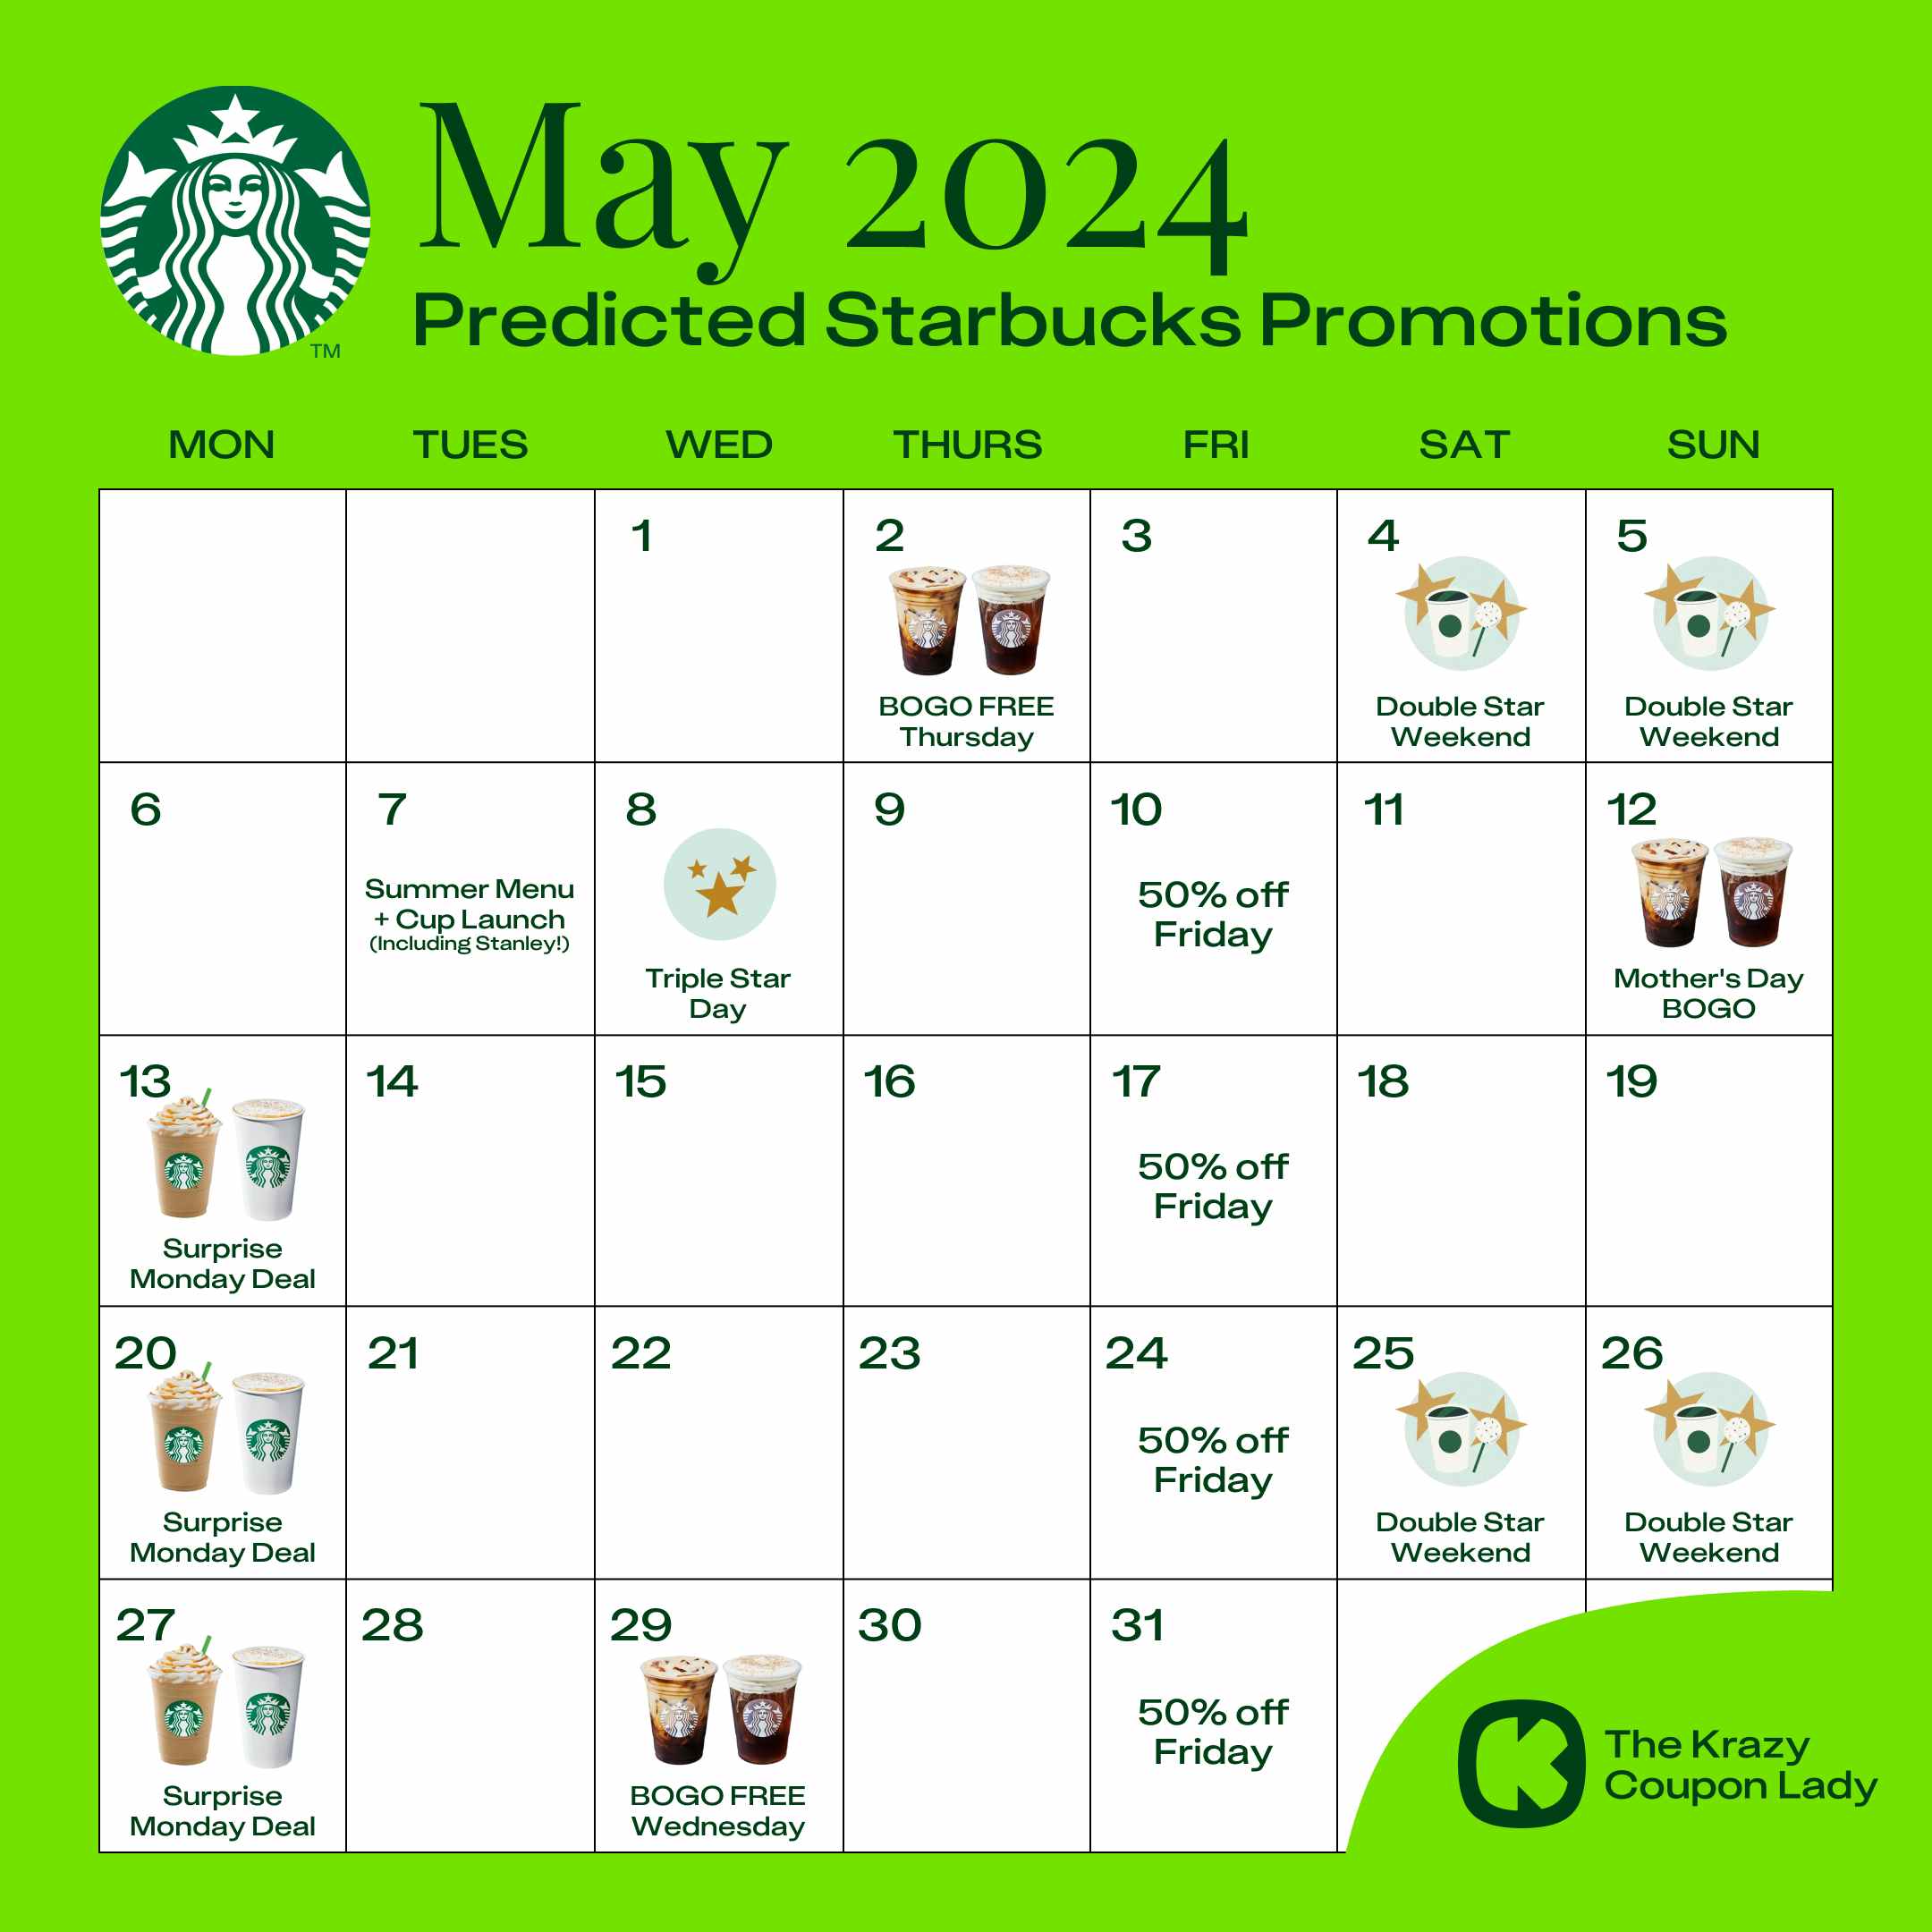 Starbucks Promotions May 2024 (Predicted)